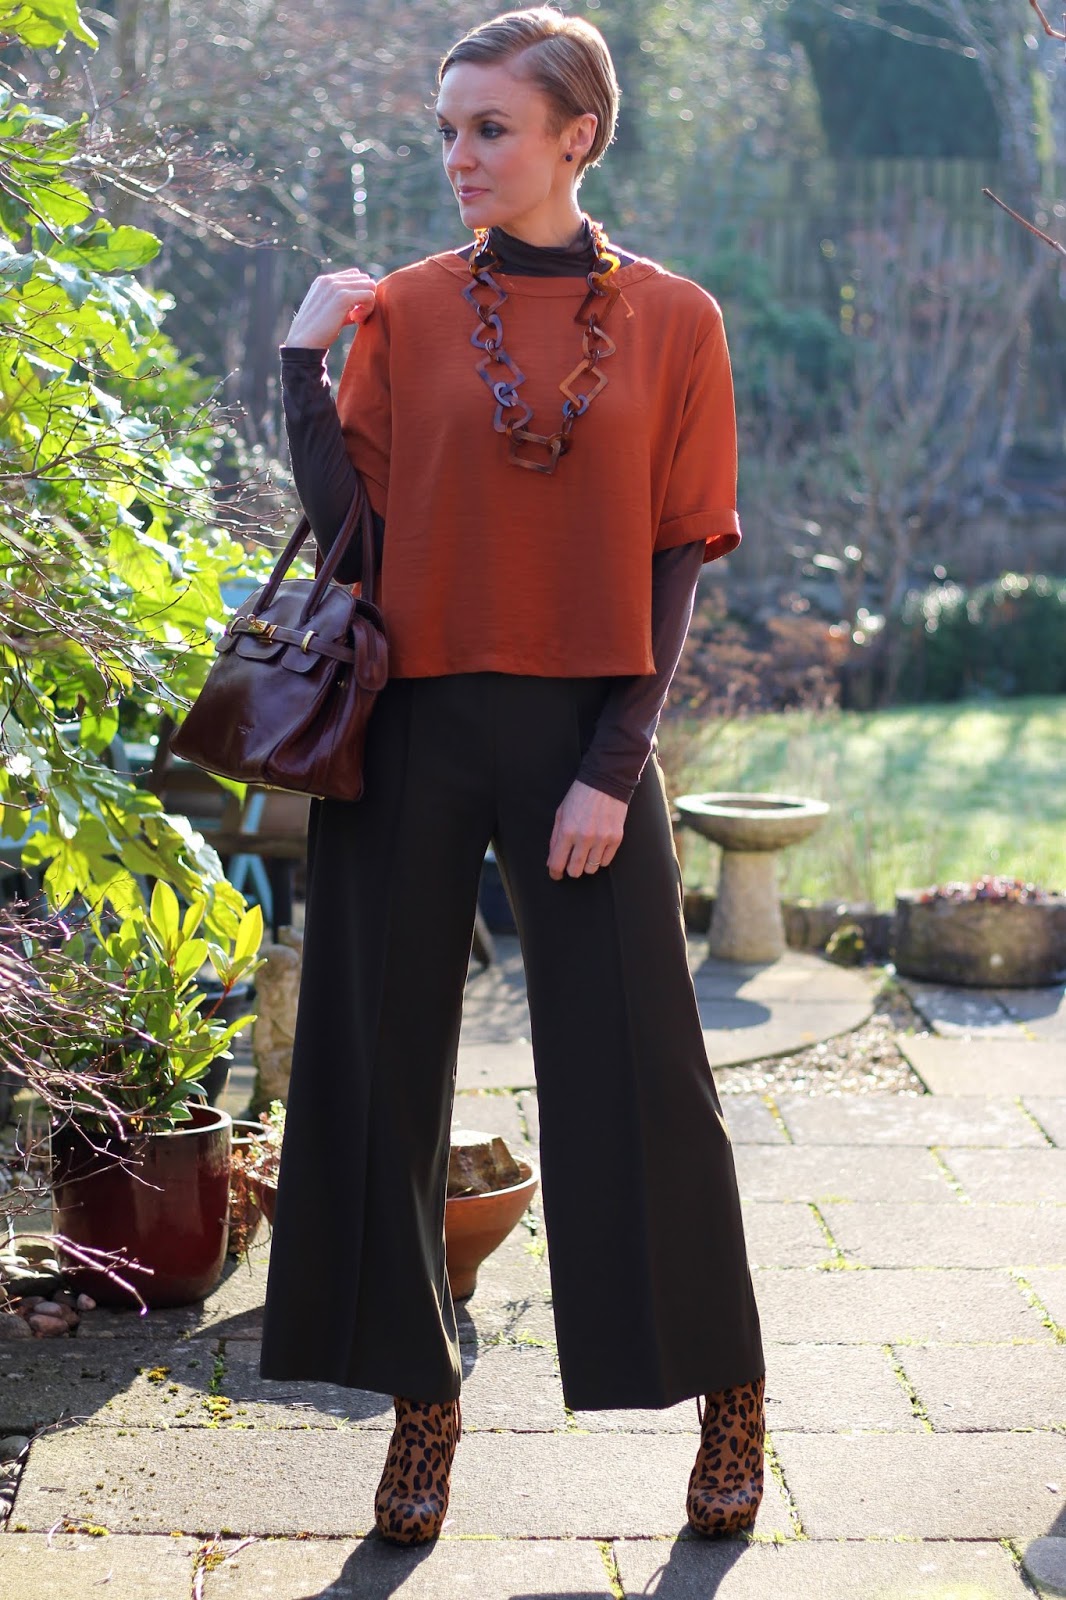 Long Culottes, Secret Layers, Leopard Boots and a Cropped Top!